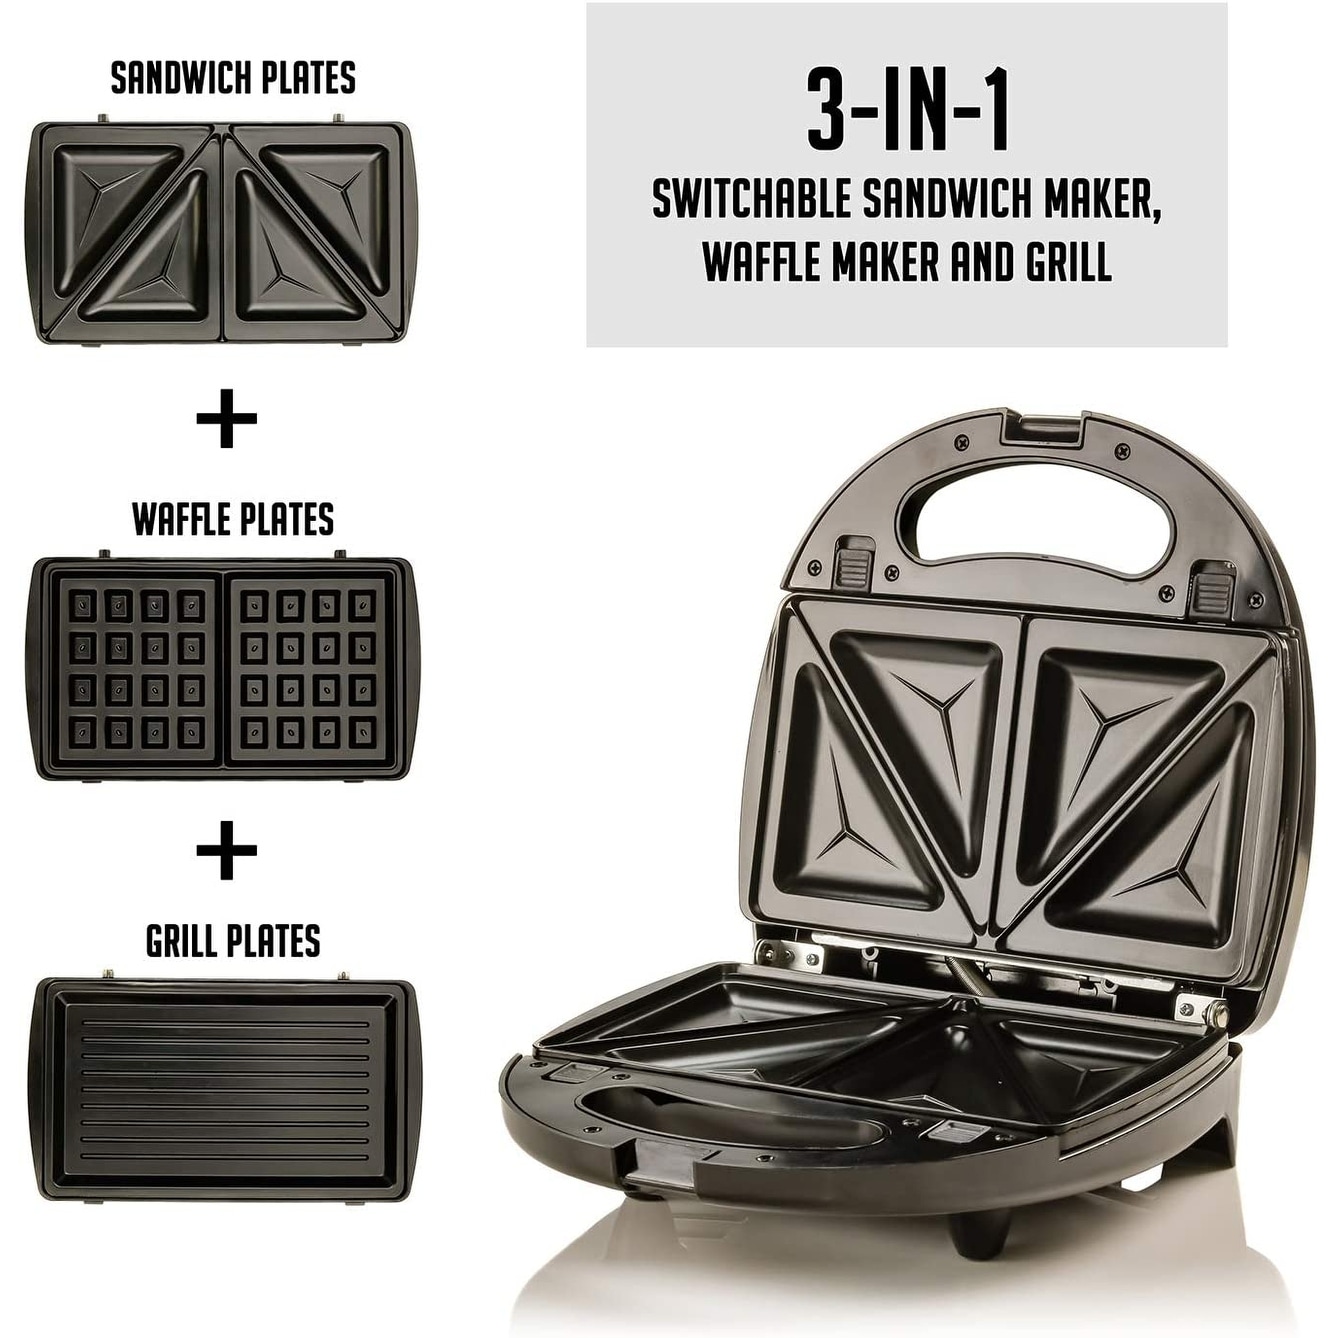 Ovente Compact Waffle Maker 13.25-Inch, Black